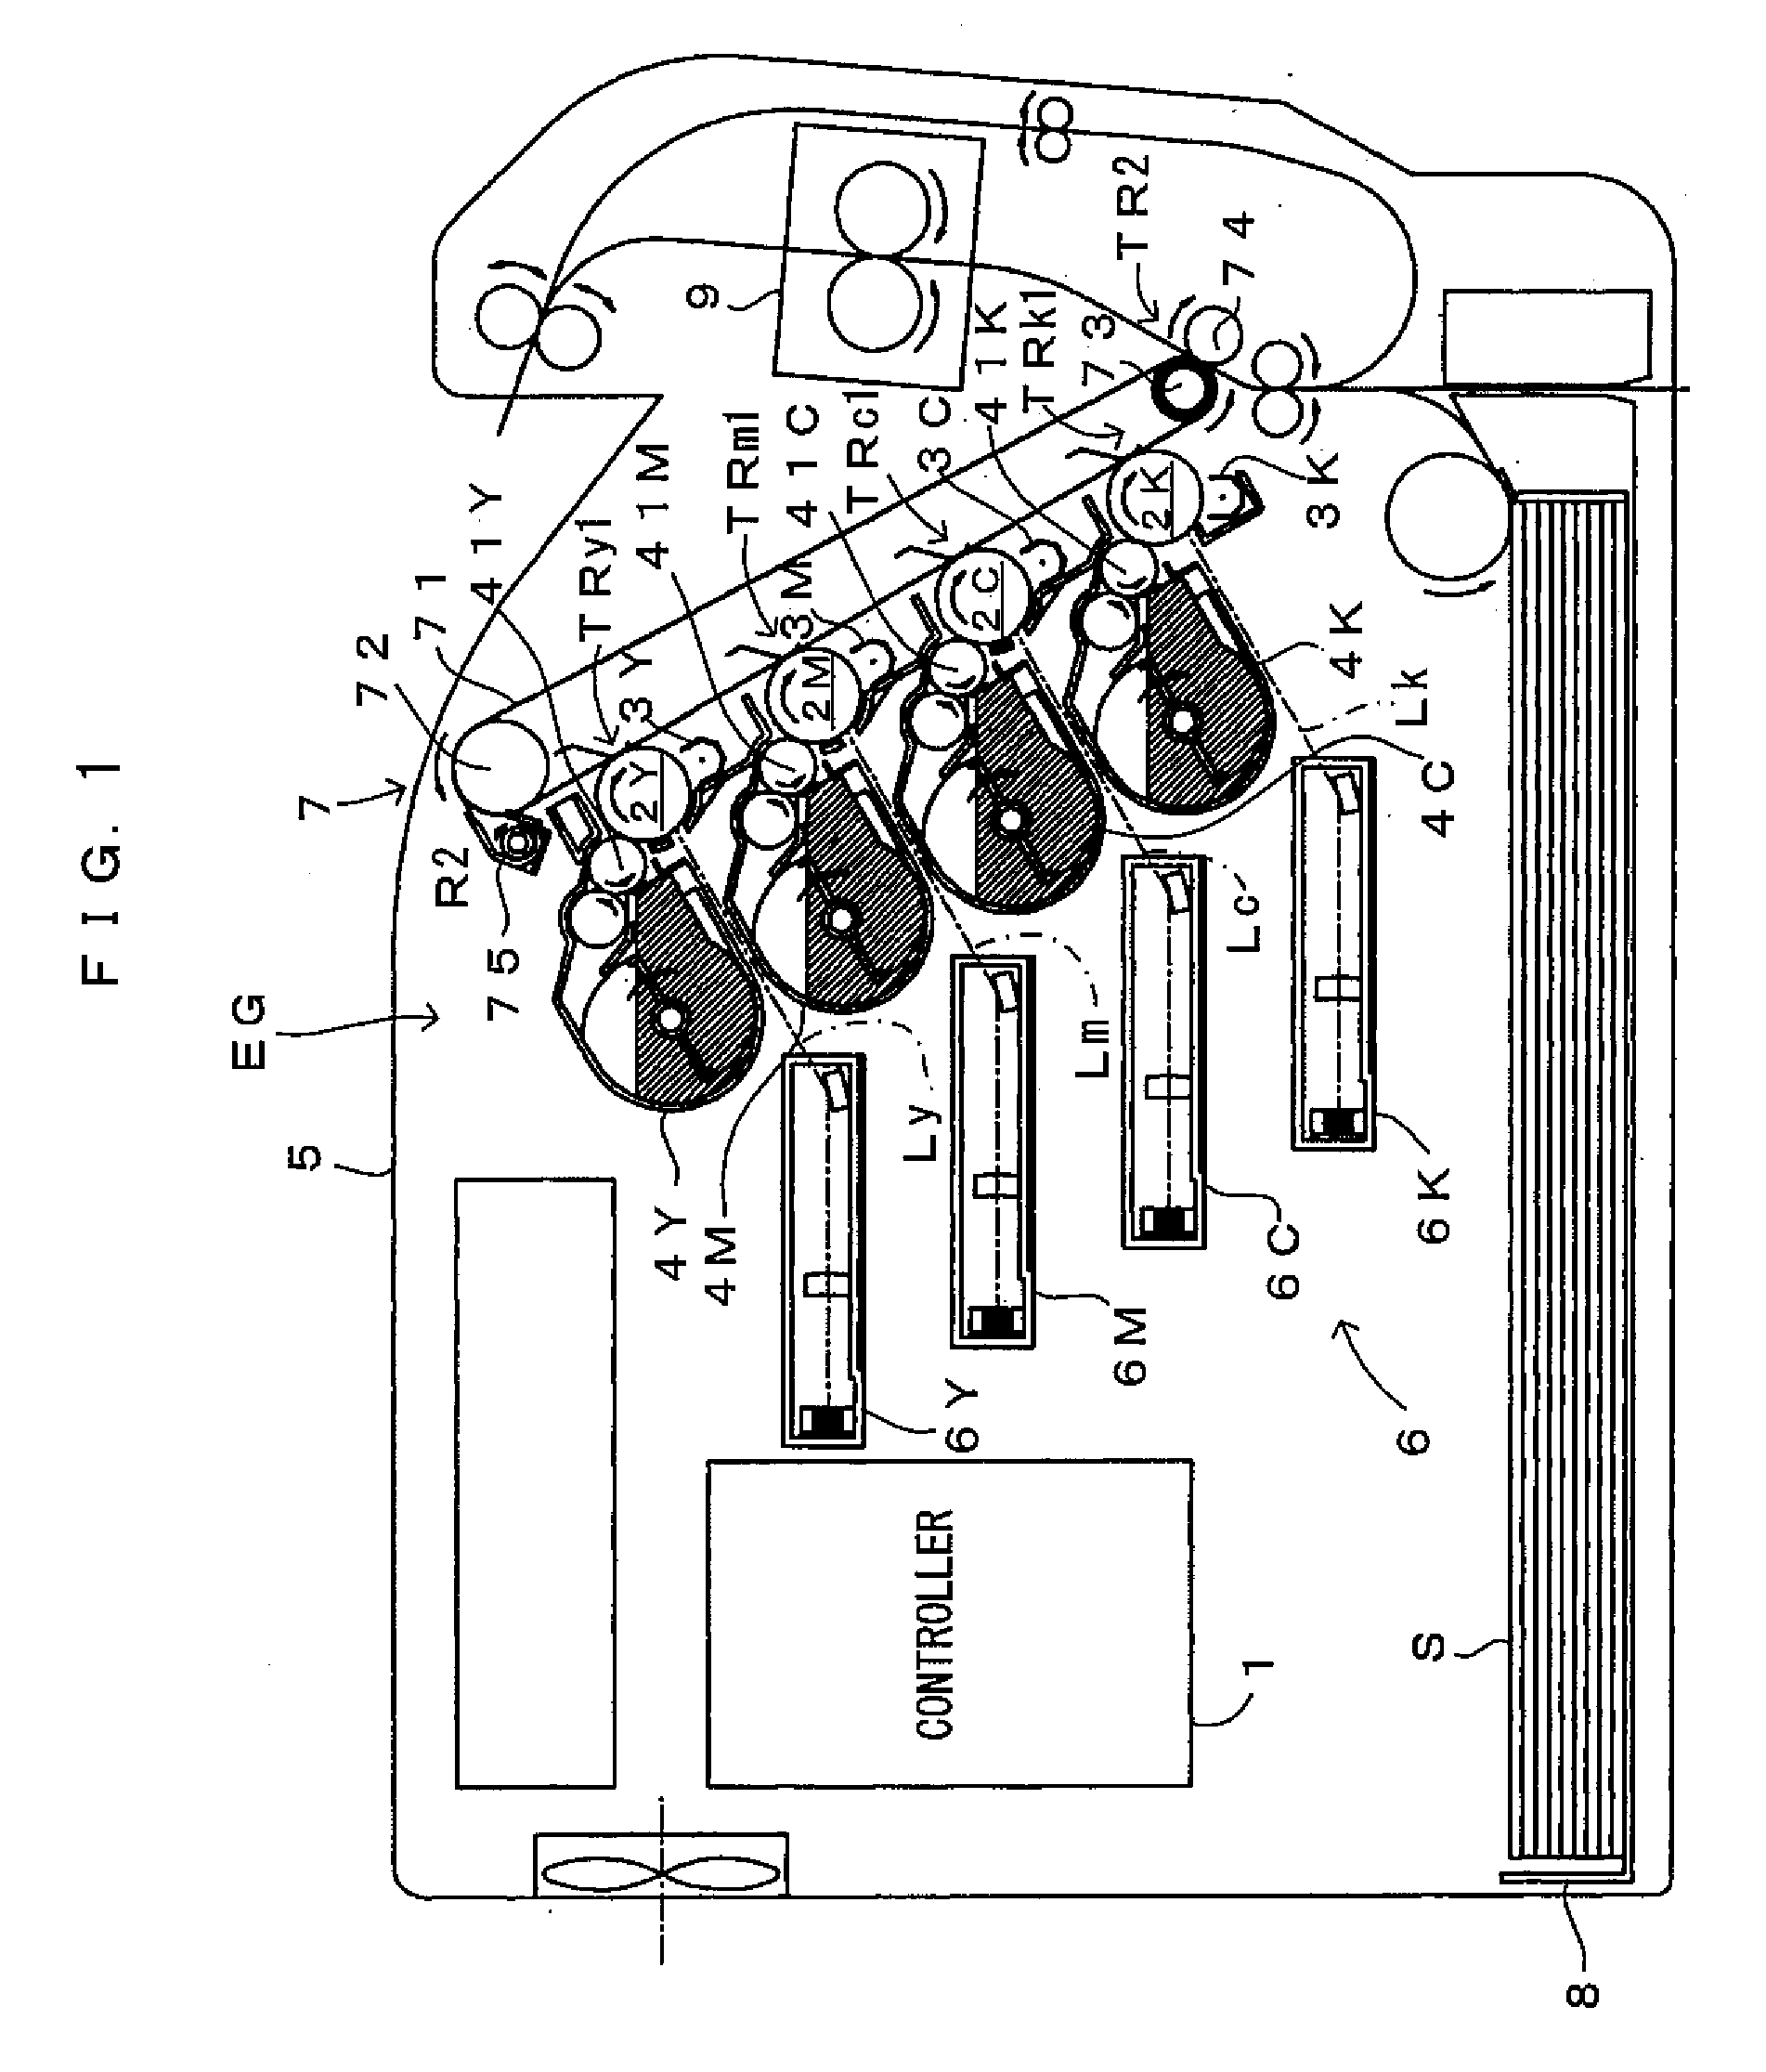 Light scanning apparatus, method of controlling the same and image forming apparatus equipped with the same